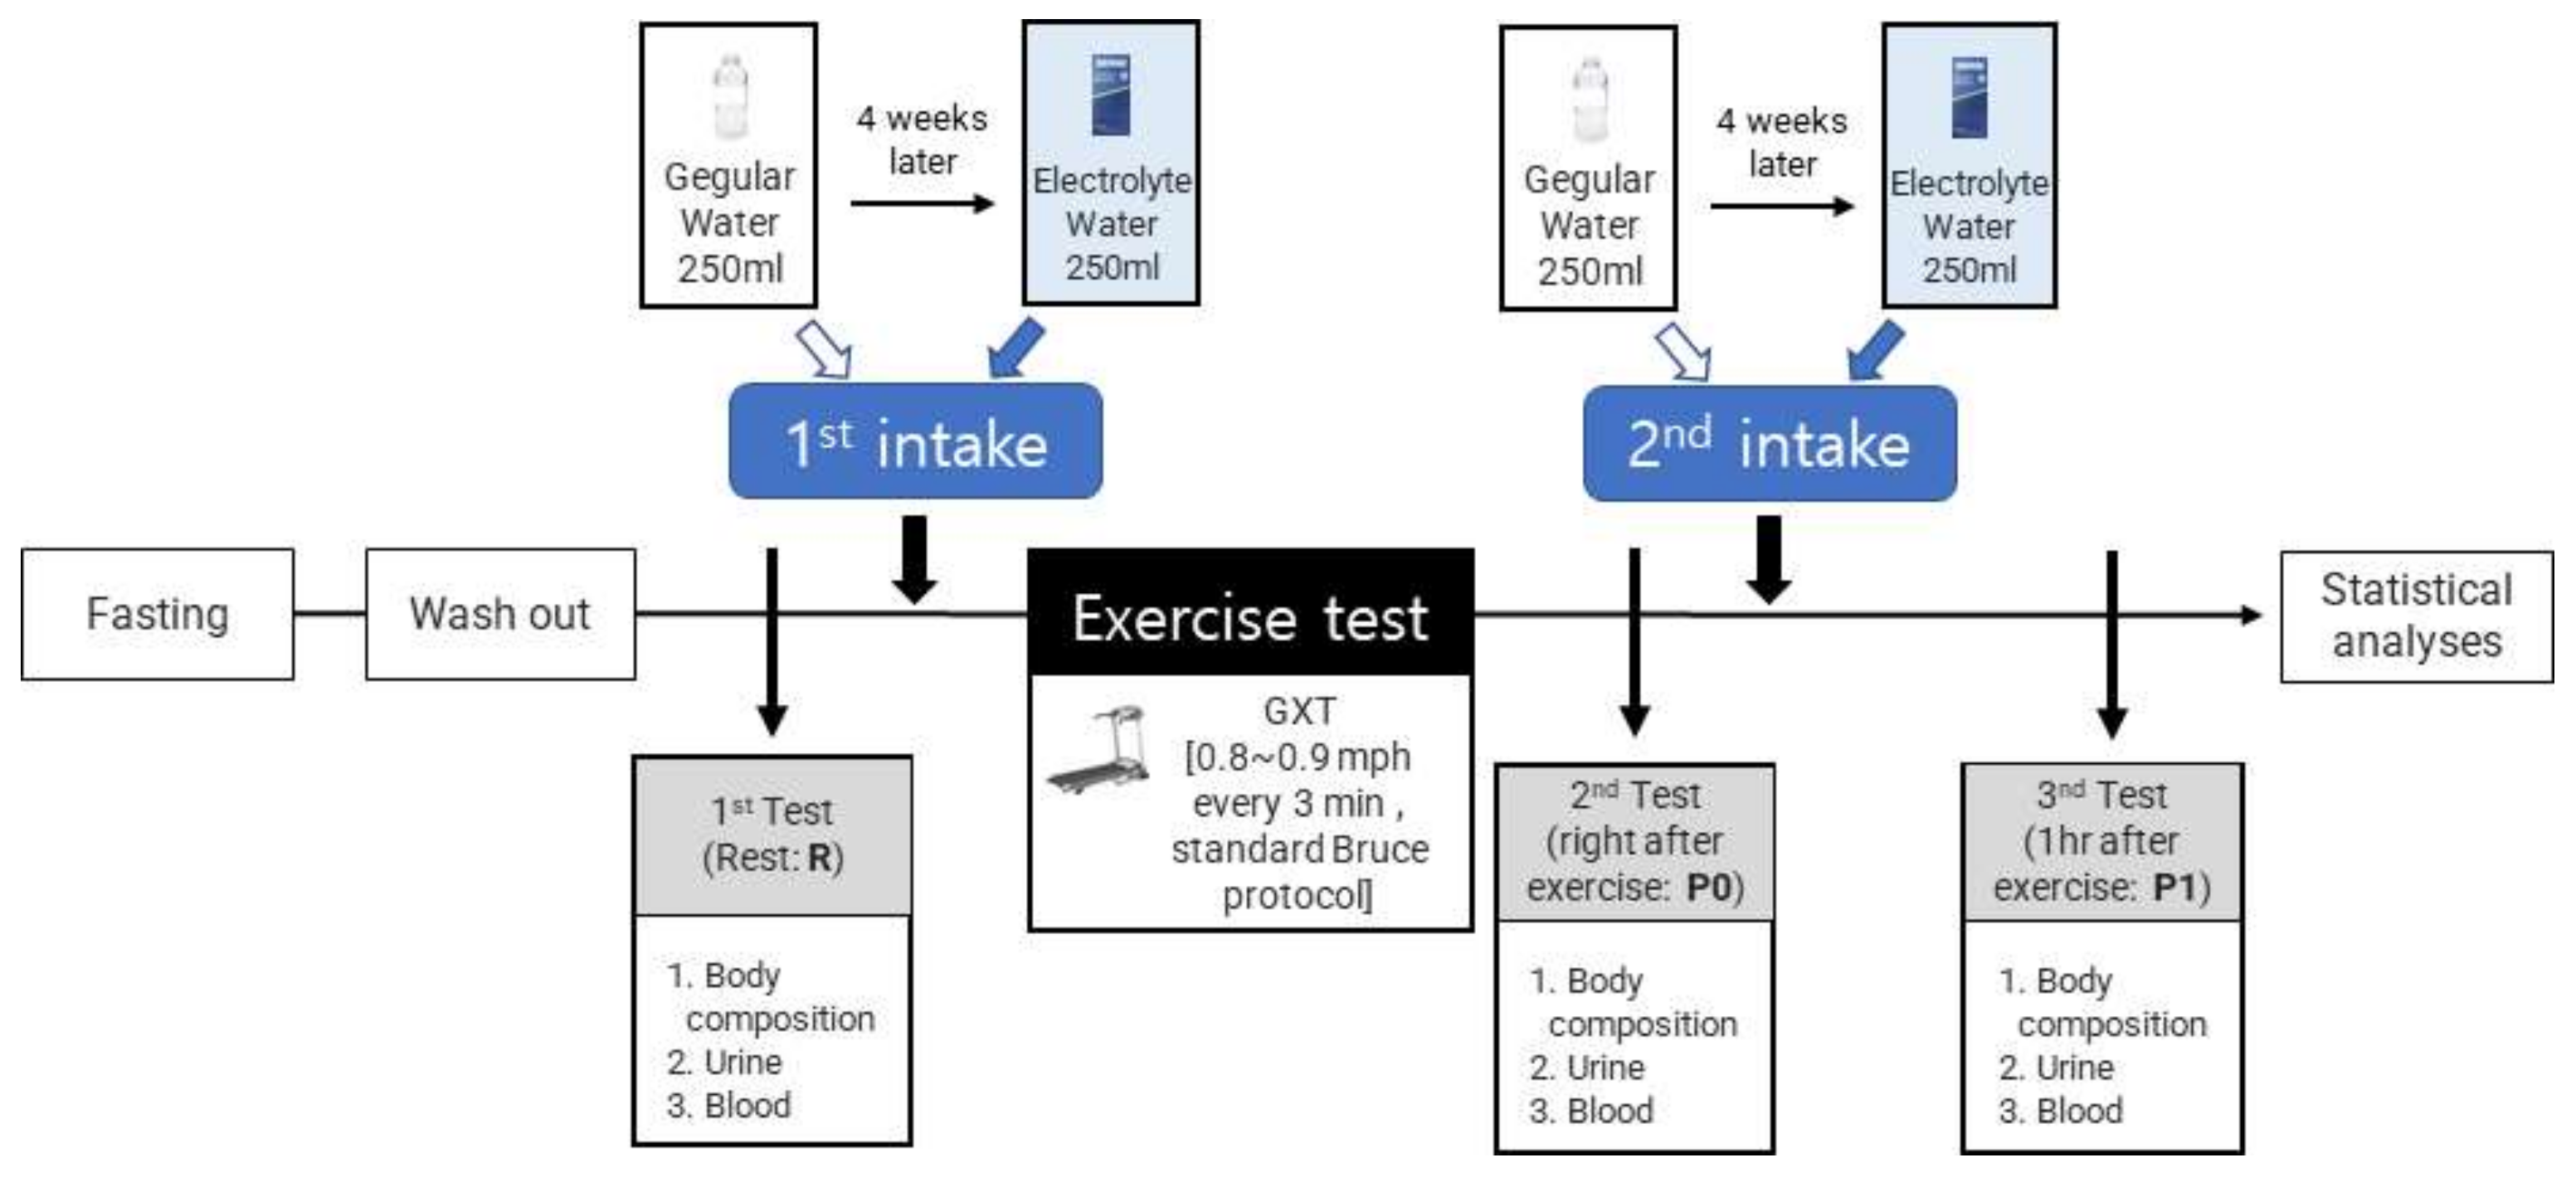 II. Understanding Electrolytes and their Role in the Body